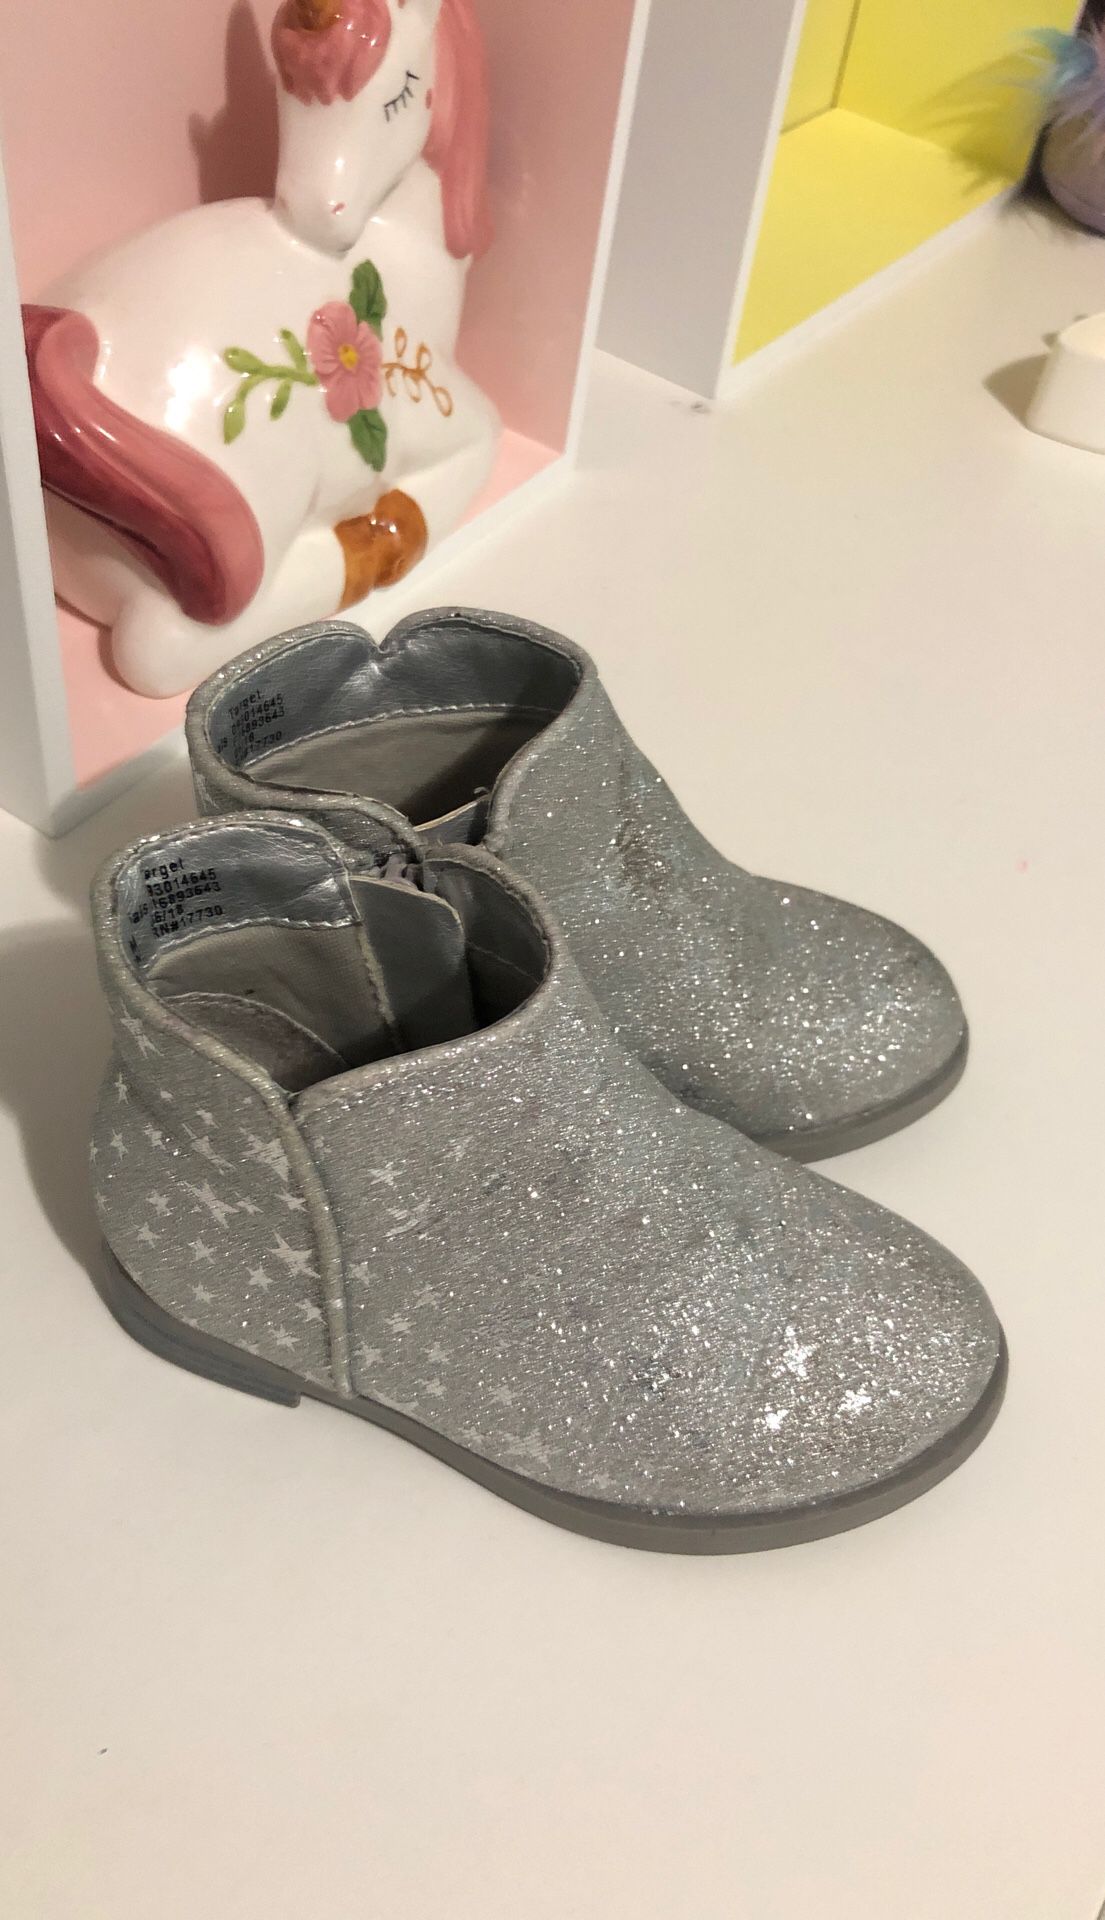 Size 7 toddler girl boots $5